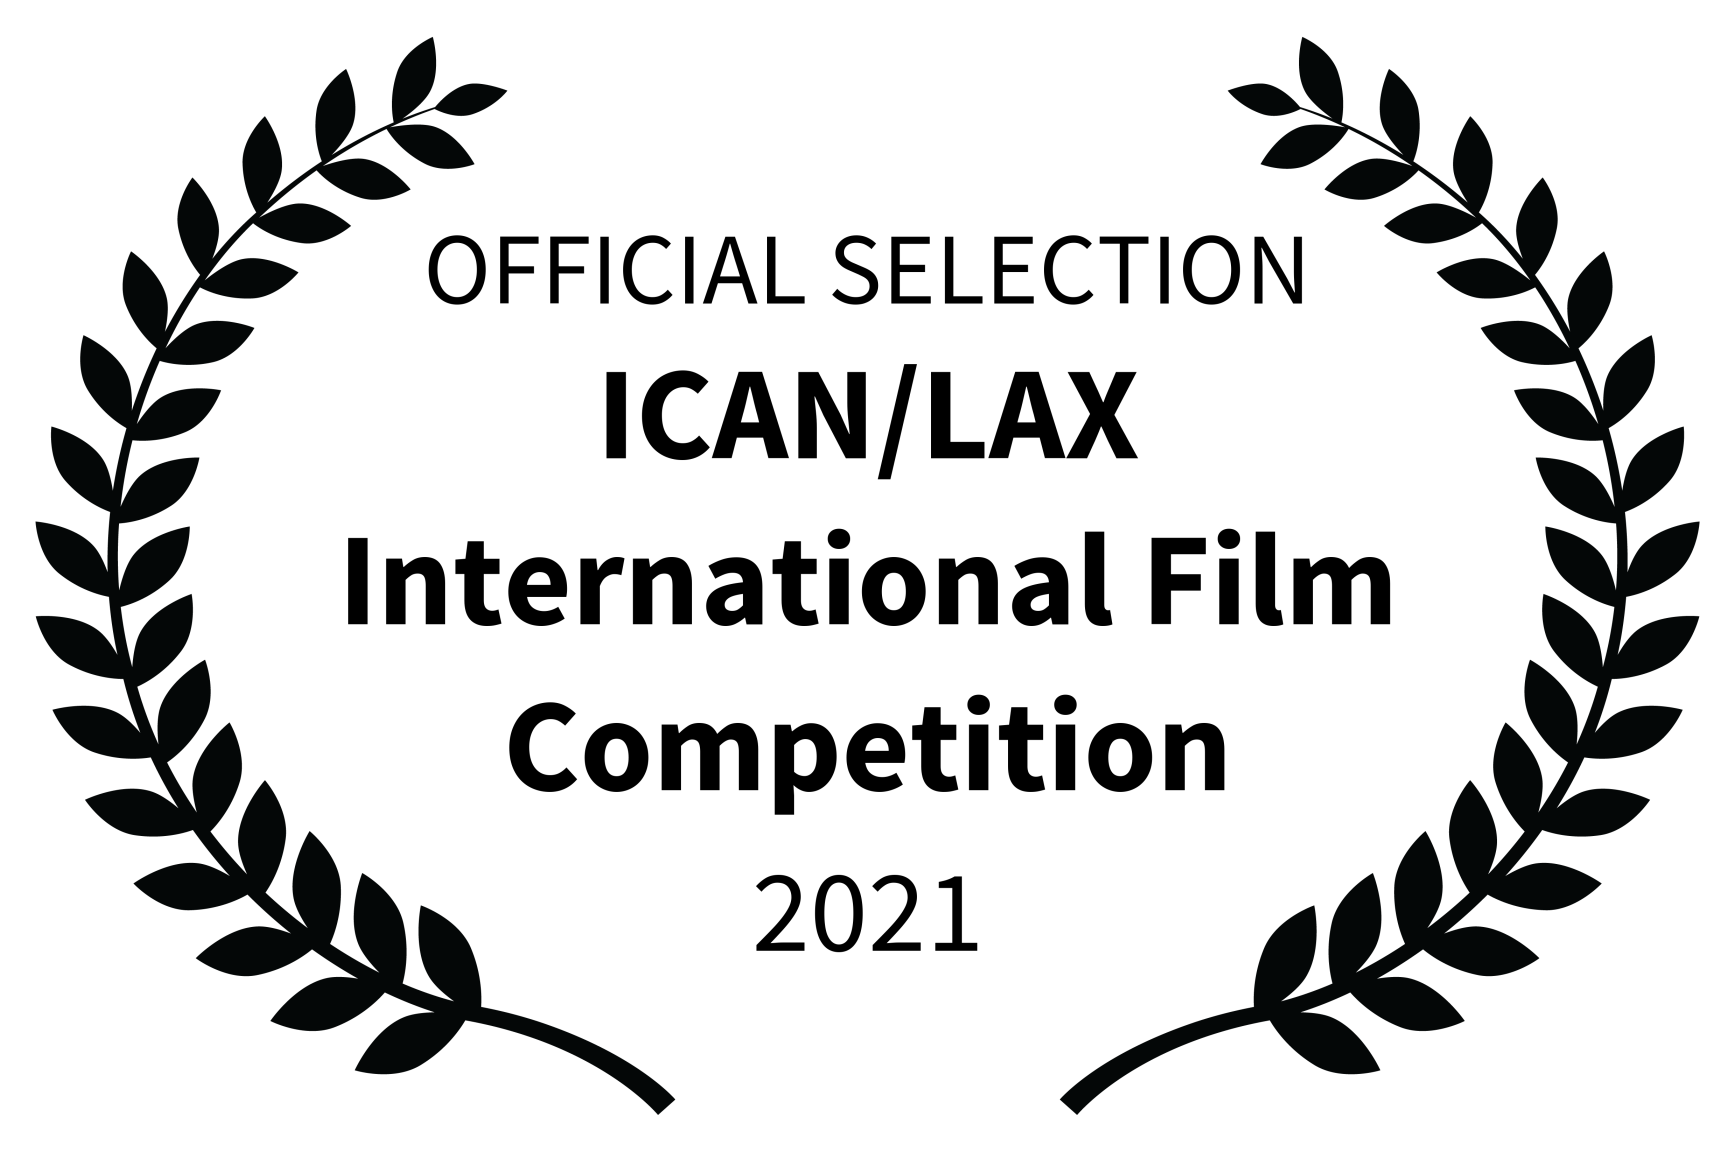 OFFICIAL SELECTION - ICANLAX International Film Competition - 2021